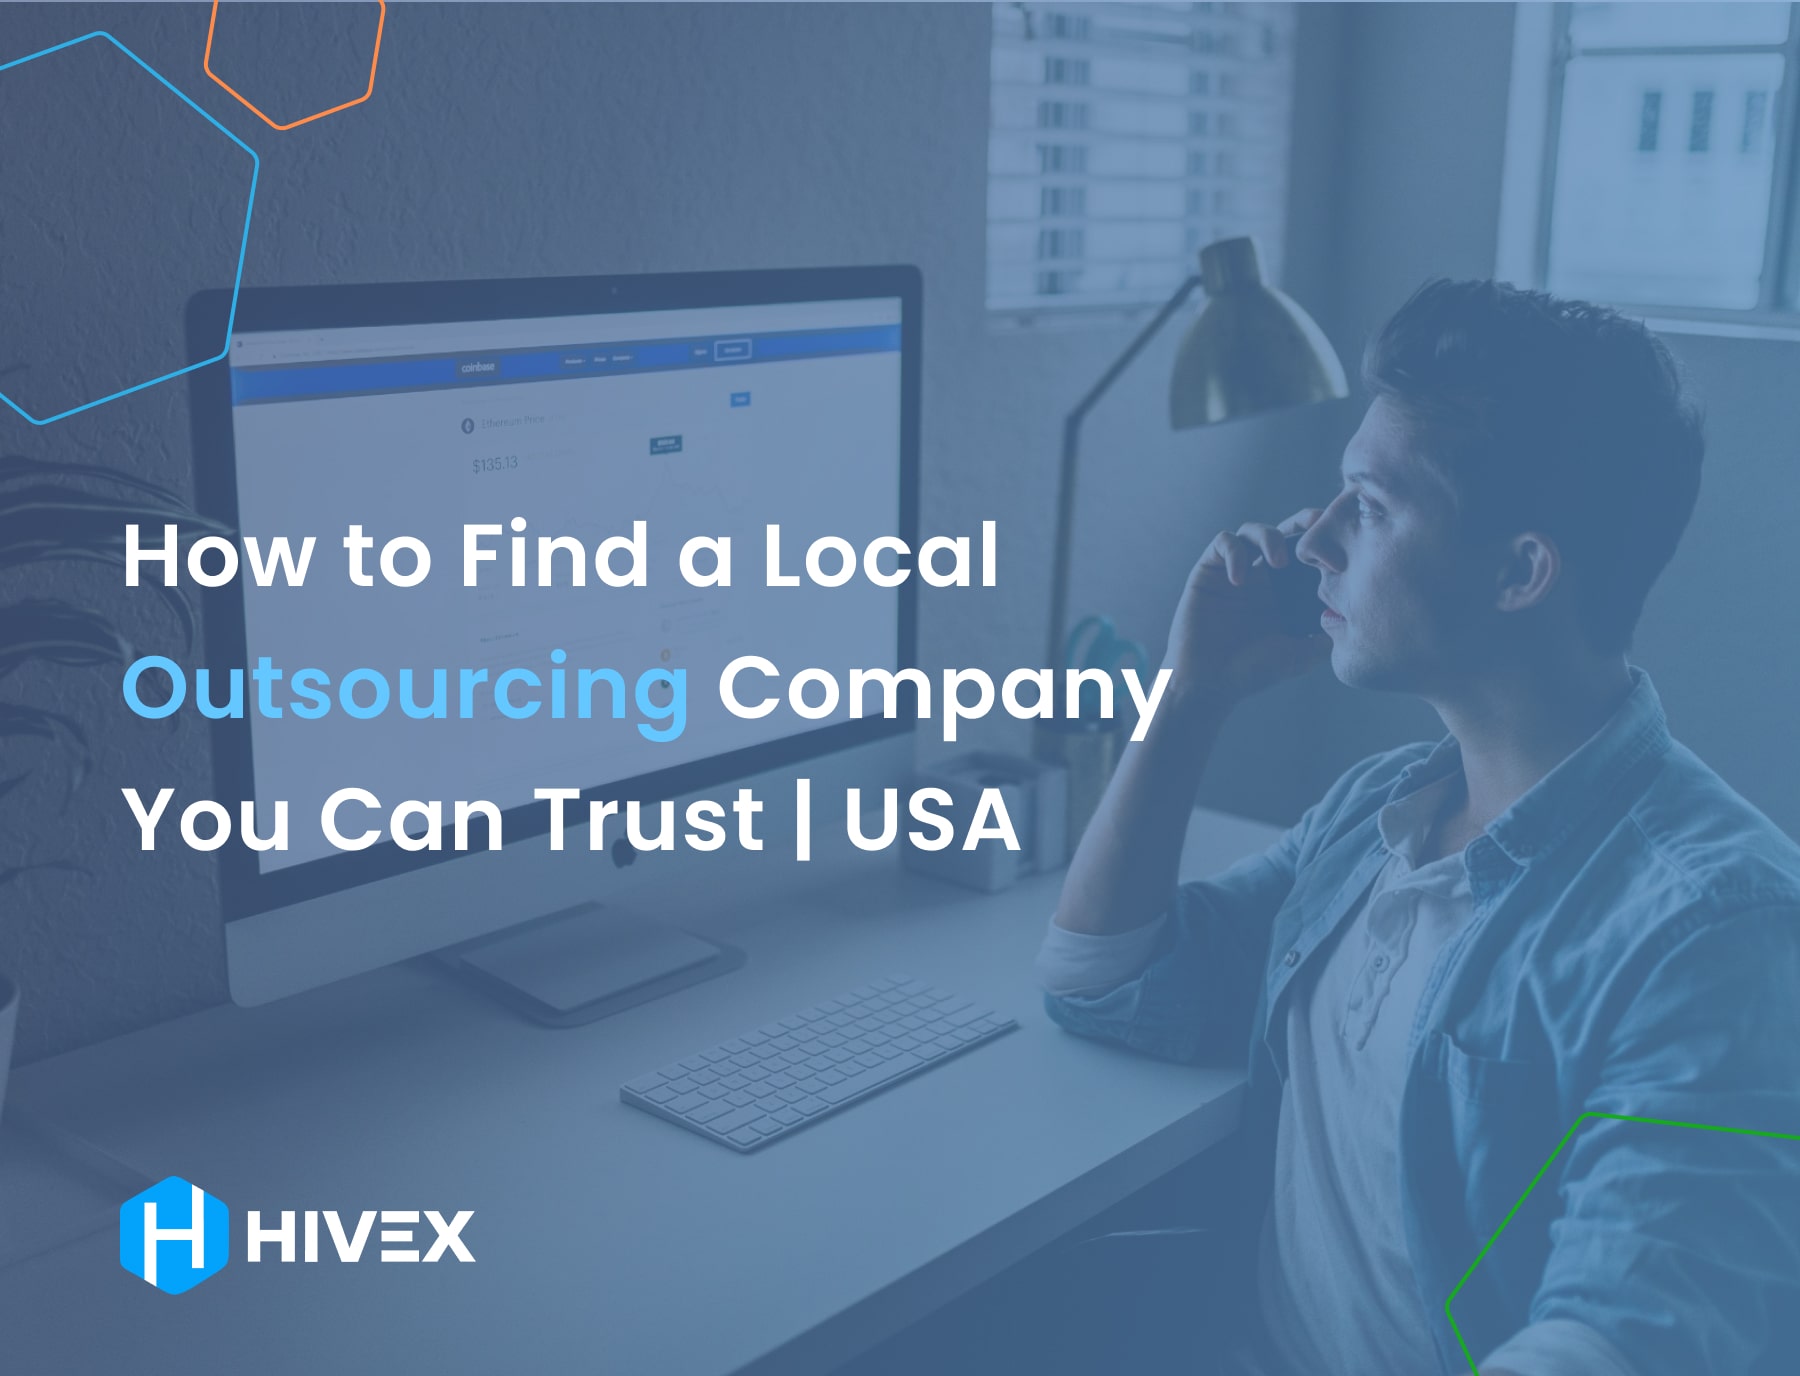 How to Find a Local Outsourcing Company You Can Trust | USA